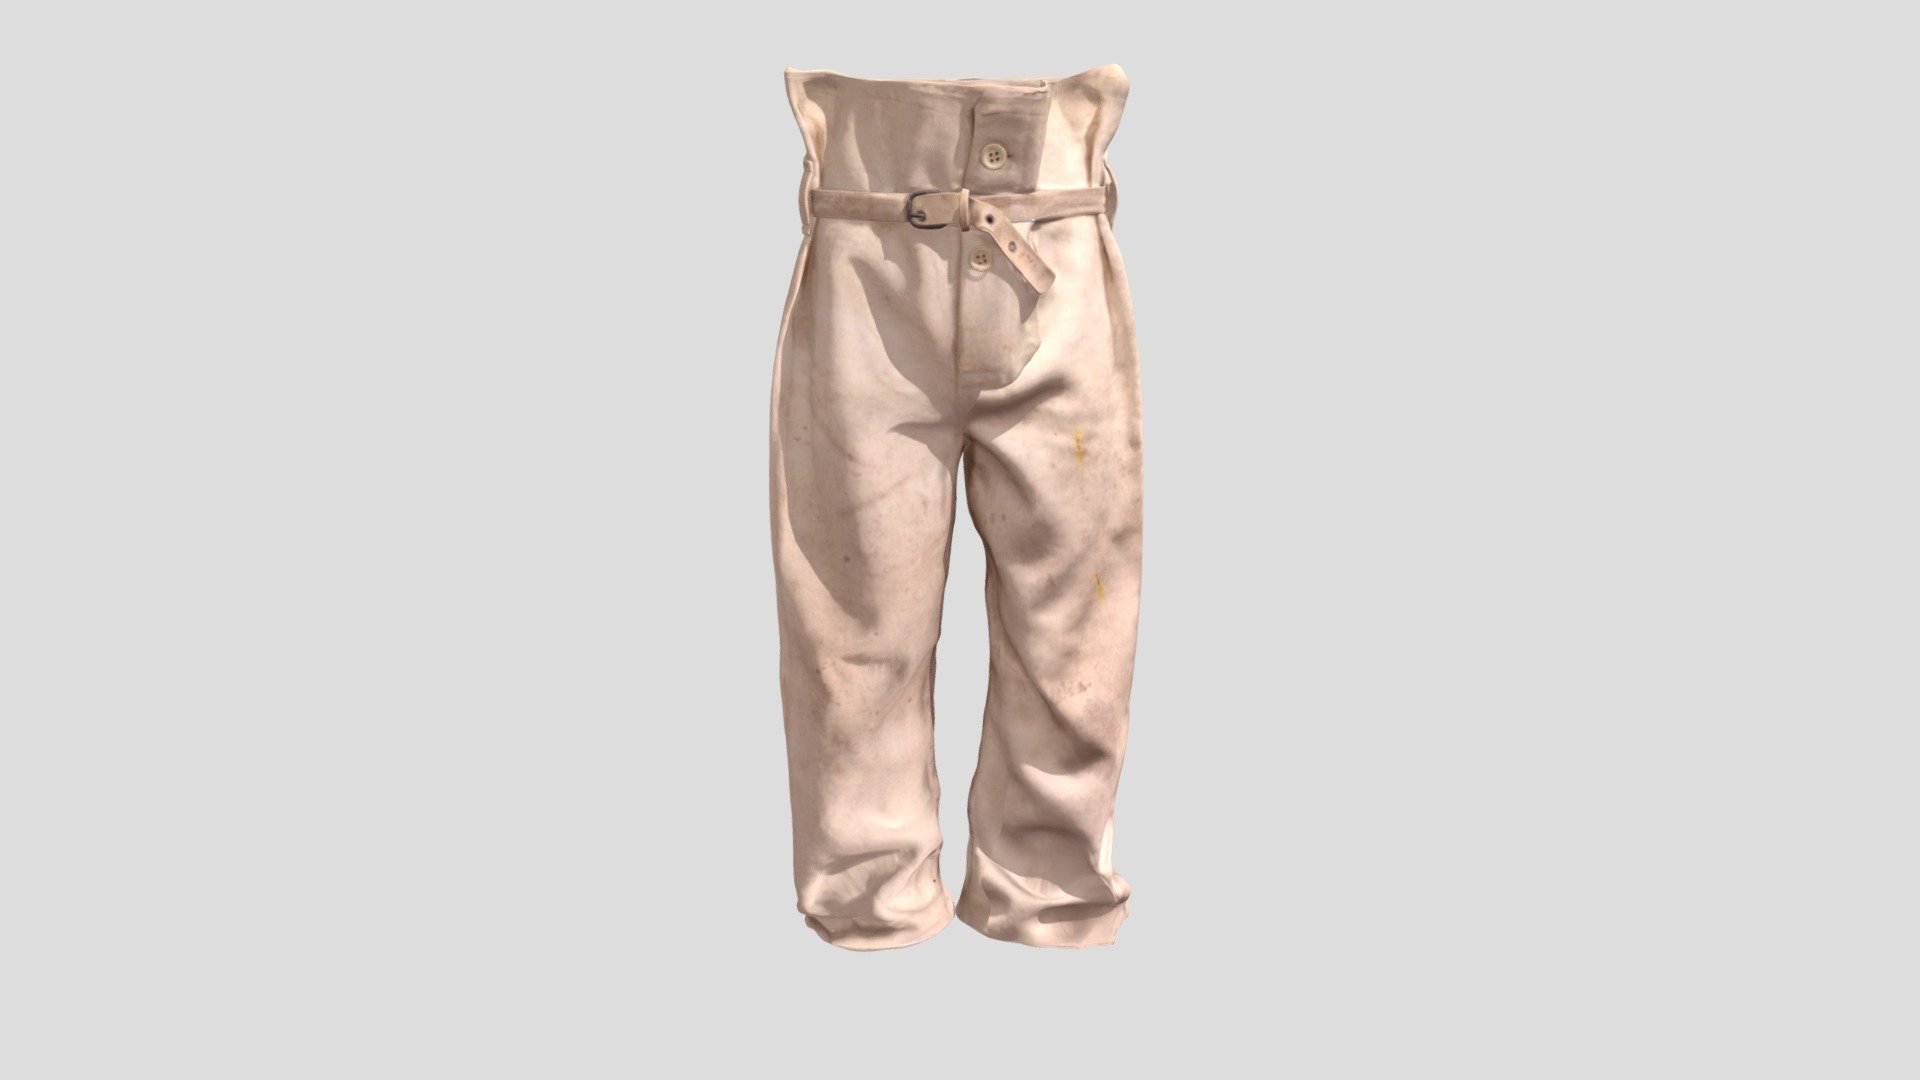 Year/estimated time period: 1893
Well worn Cornish mine managers trousers in cream.
Authentic Cornish mining trousers in white/cream which indicates that they belonged to a mine manager. There are 2 buttons down the front with a functional belt. There are 3 belt loops going round the waist, one either side of the hips and one on the back. The trousers are incredibly well-worn with many different holes, tears and burn marks on them
Model was made by Purpose3D - Cornish Mining Trousers - 3D model by musecornishlife 3d model